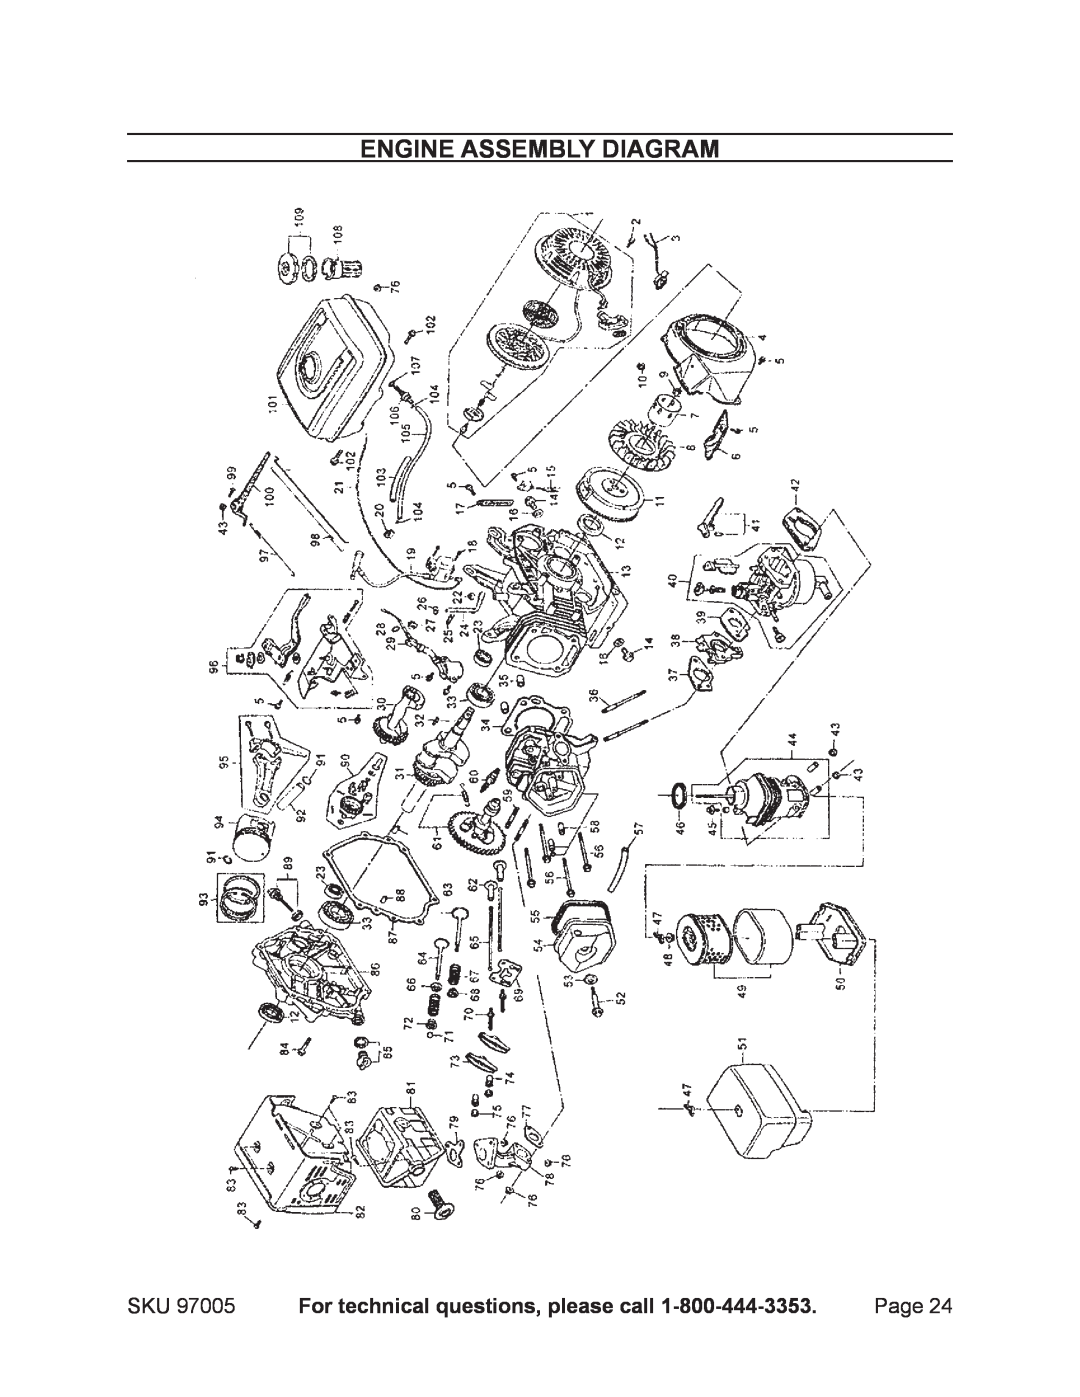 Harbor Freight Tools 97005 manual Engine Assembly Diagram, For technical questions, please call 